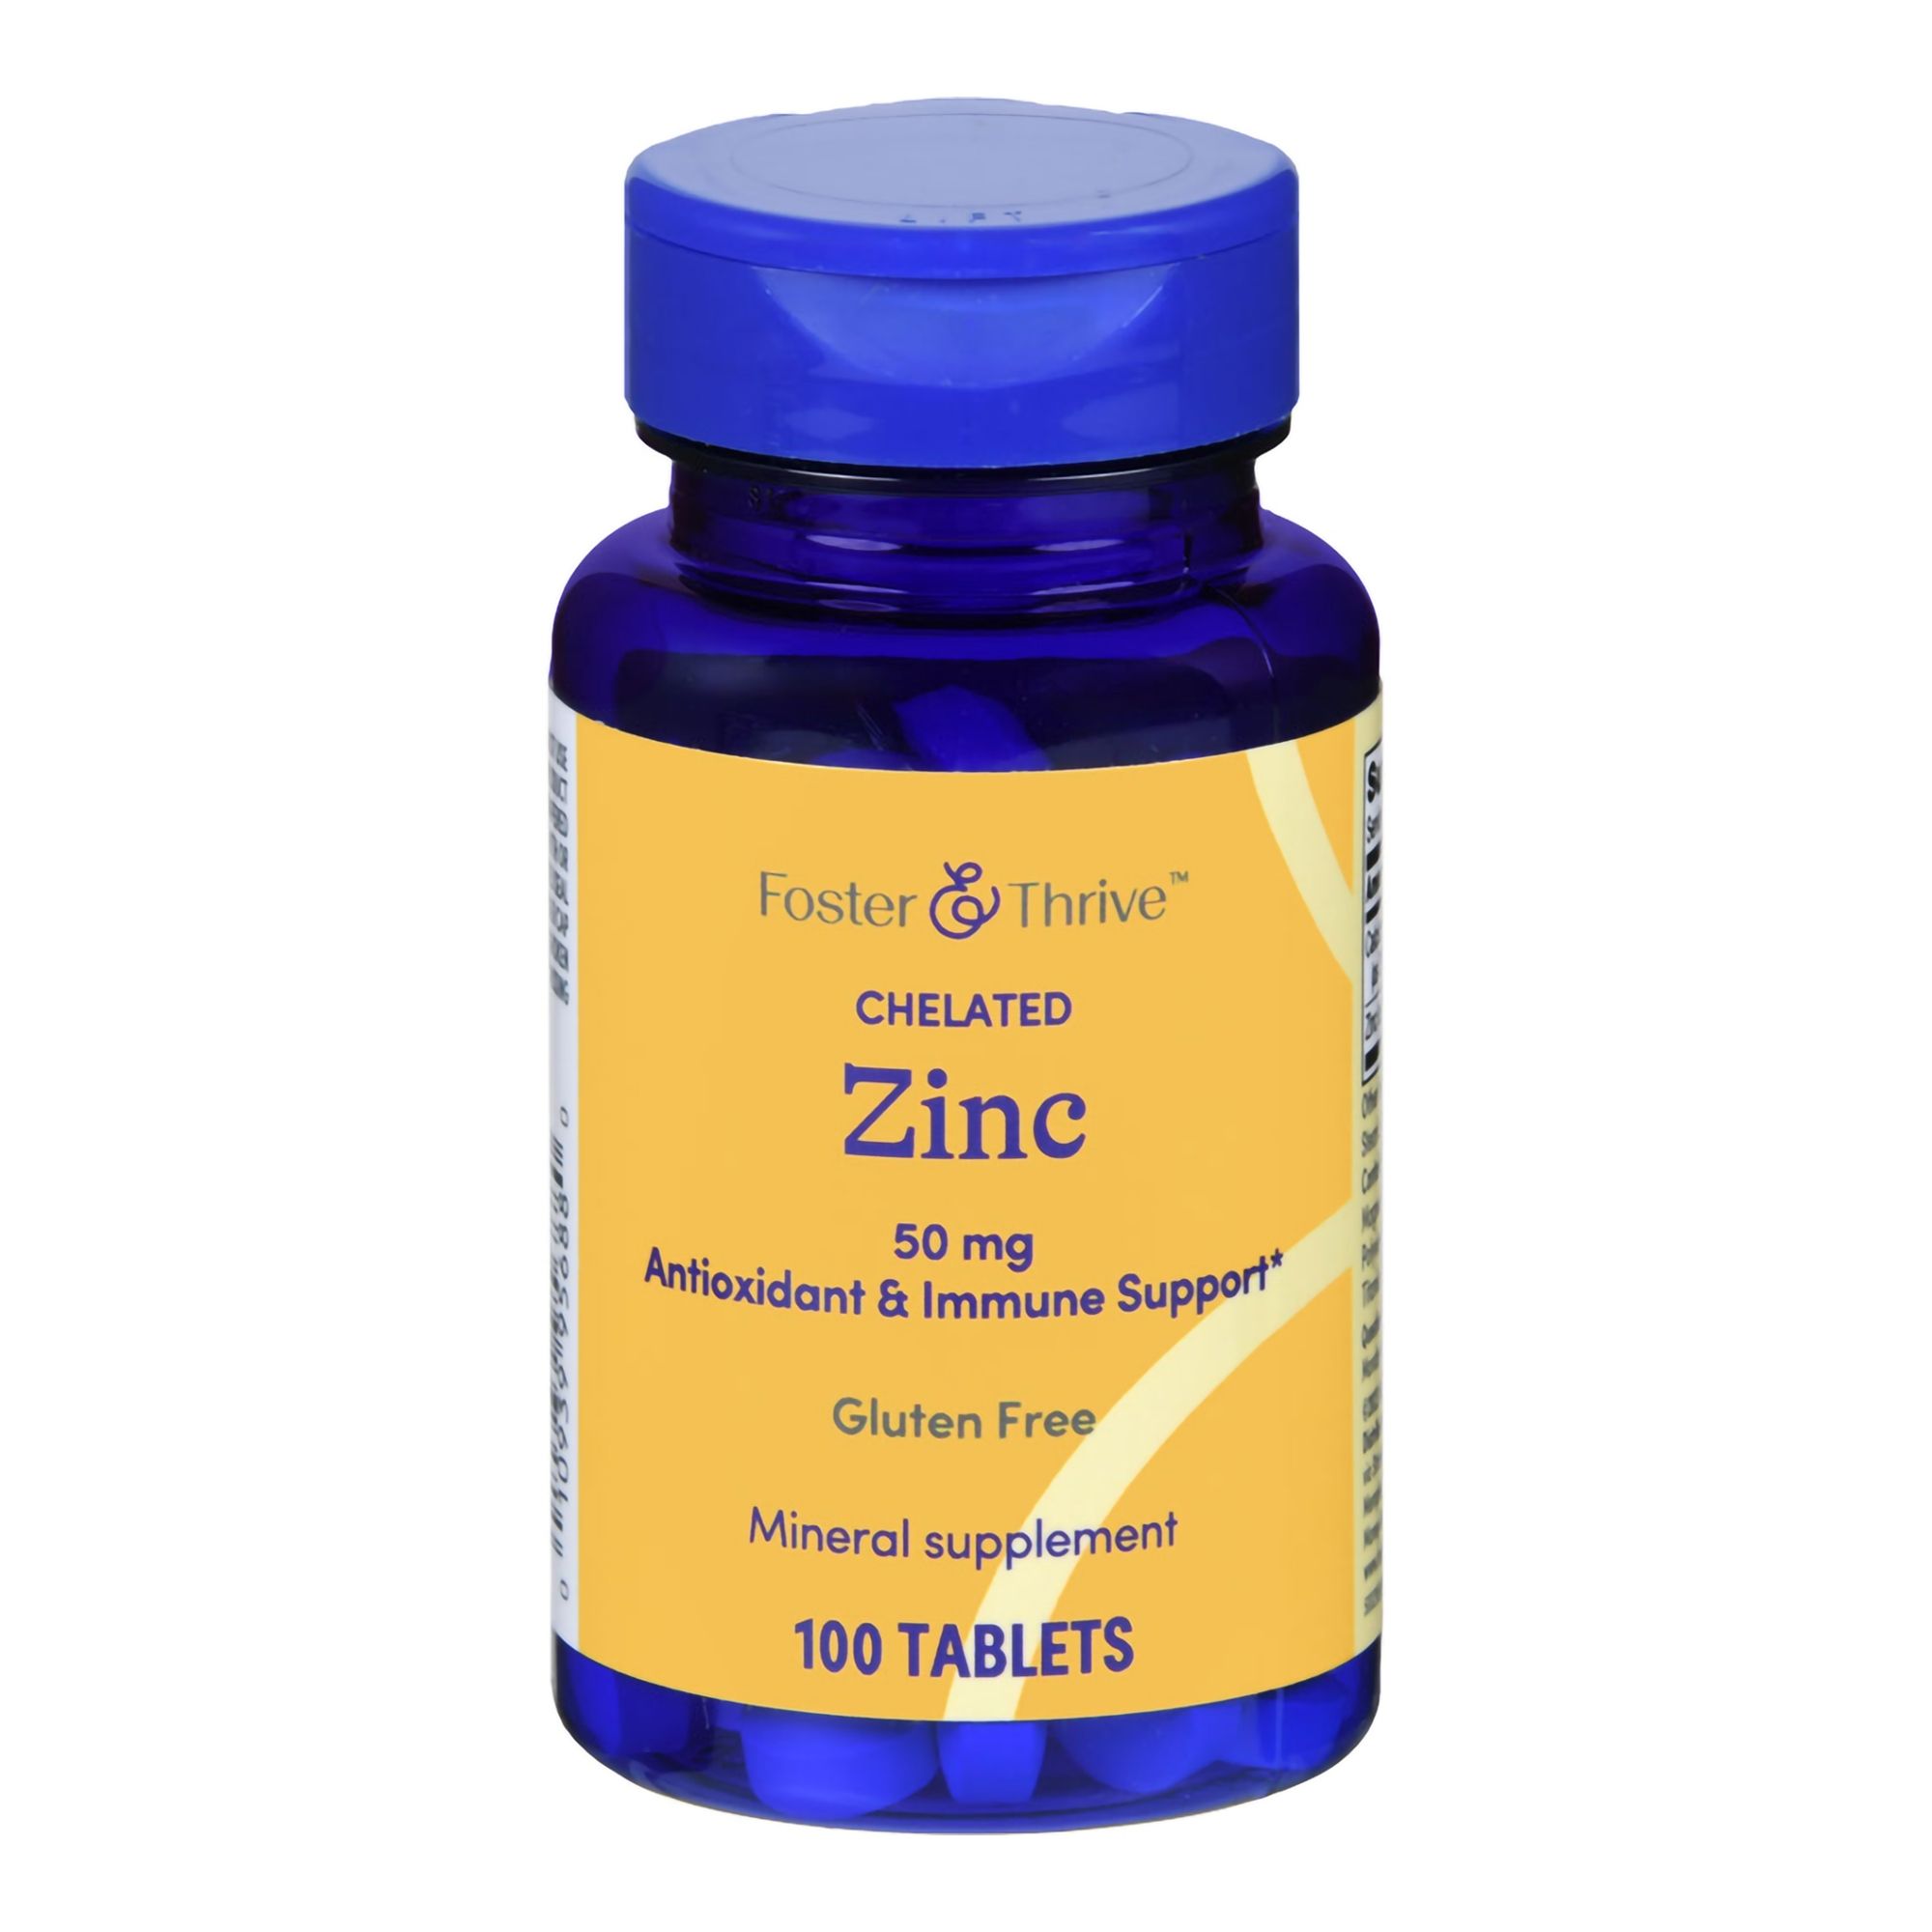 Foster & Thrive Zinc Antioxidant & Immune Support Tablets, 50 mg - 100 ct